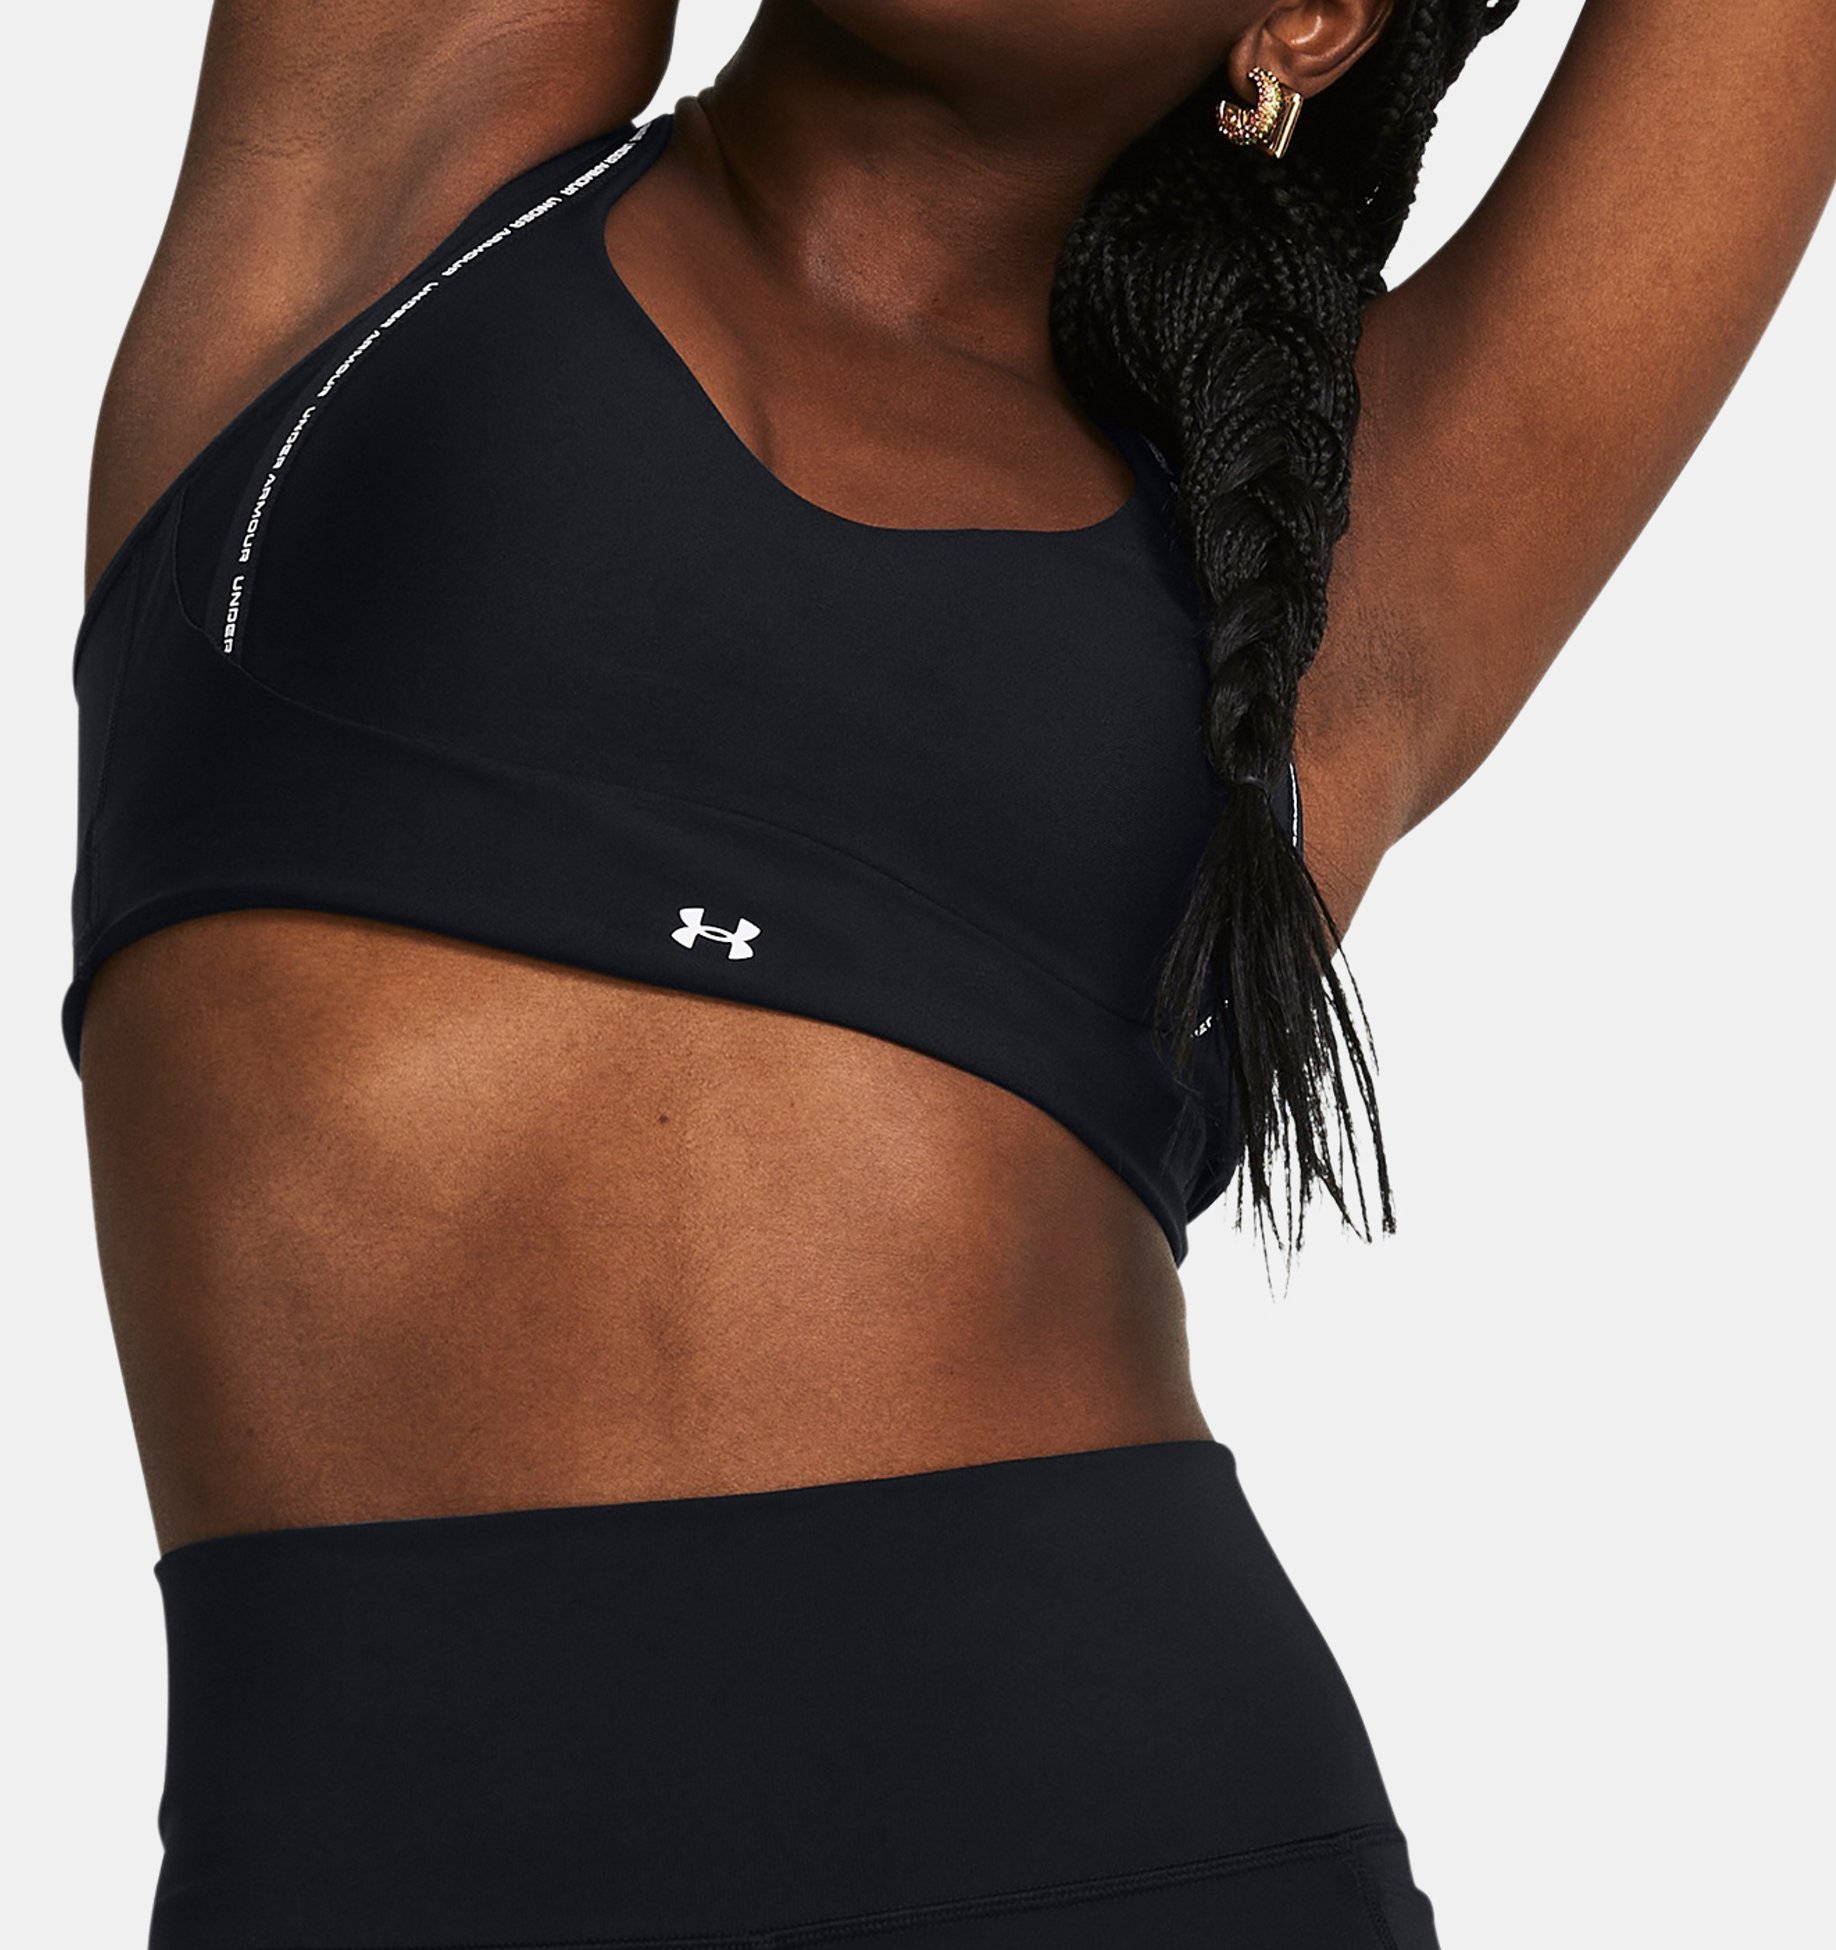 https://underarmour.scene7.com/is/image/Underarmour/V5-1384128-001_FC?rp=standard-0pad|pdpZoomDesktop&scl=0.72&fmt=jpg&qlt=85&resMode=sharp2&cache=on,on&bgc=f0f0f0&wid=1836&hei=1950&size=1500,1500